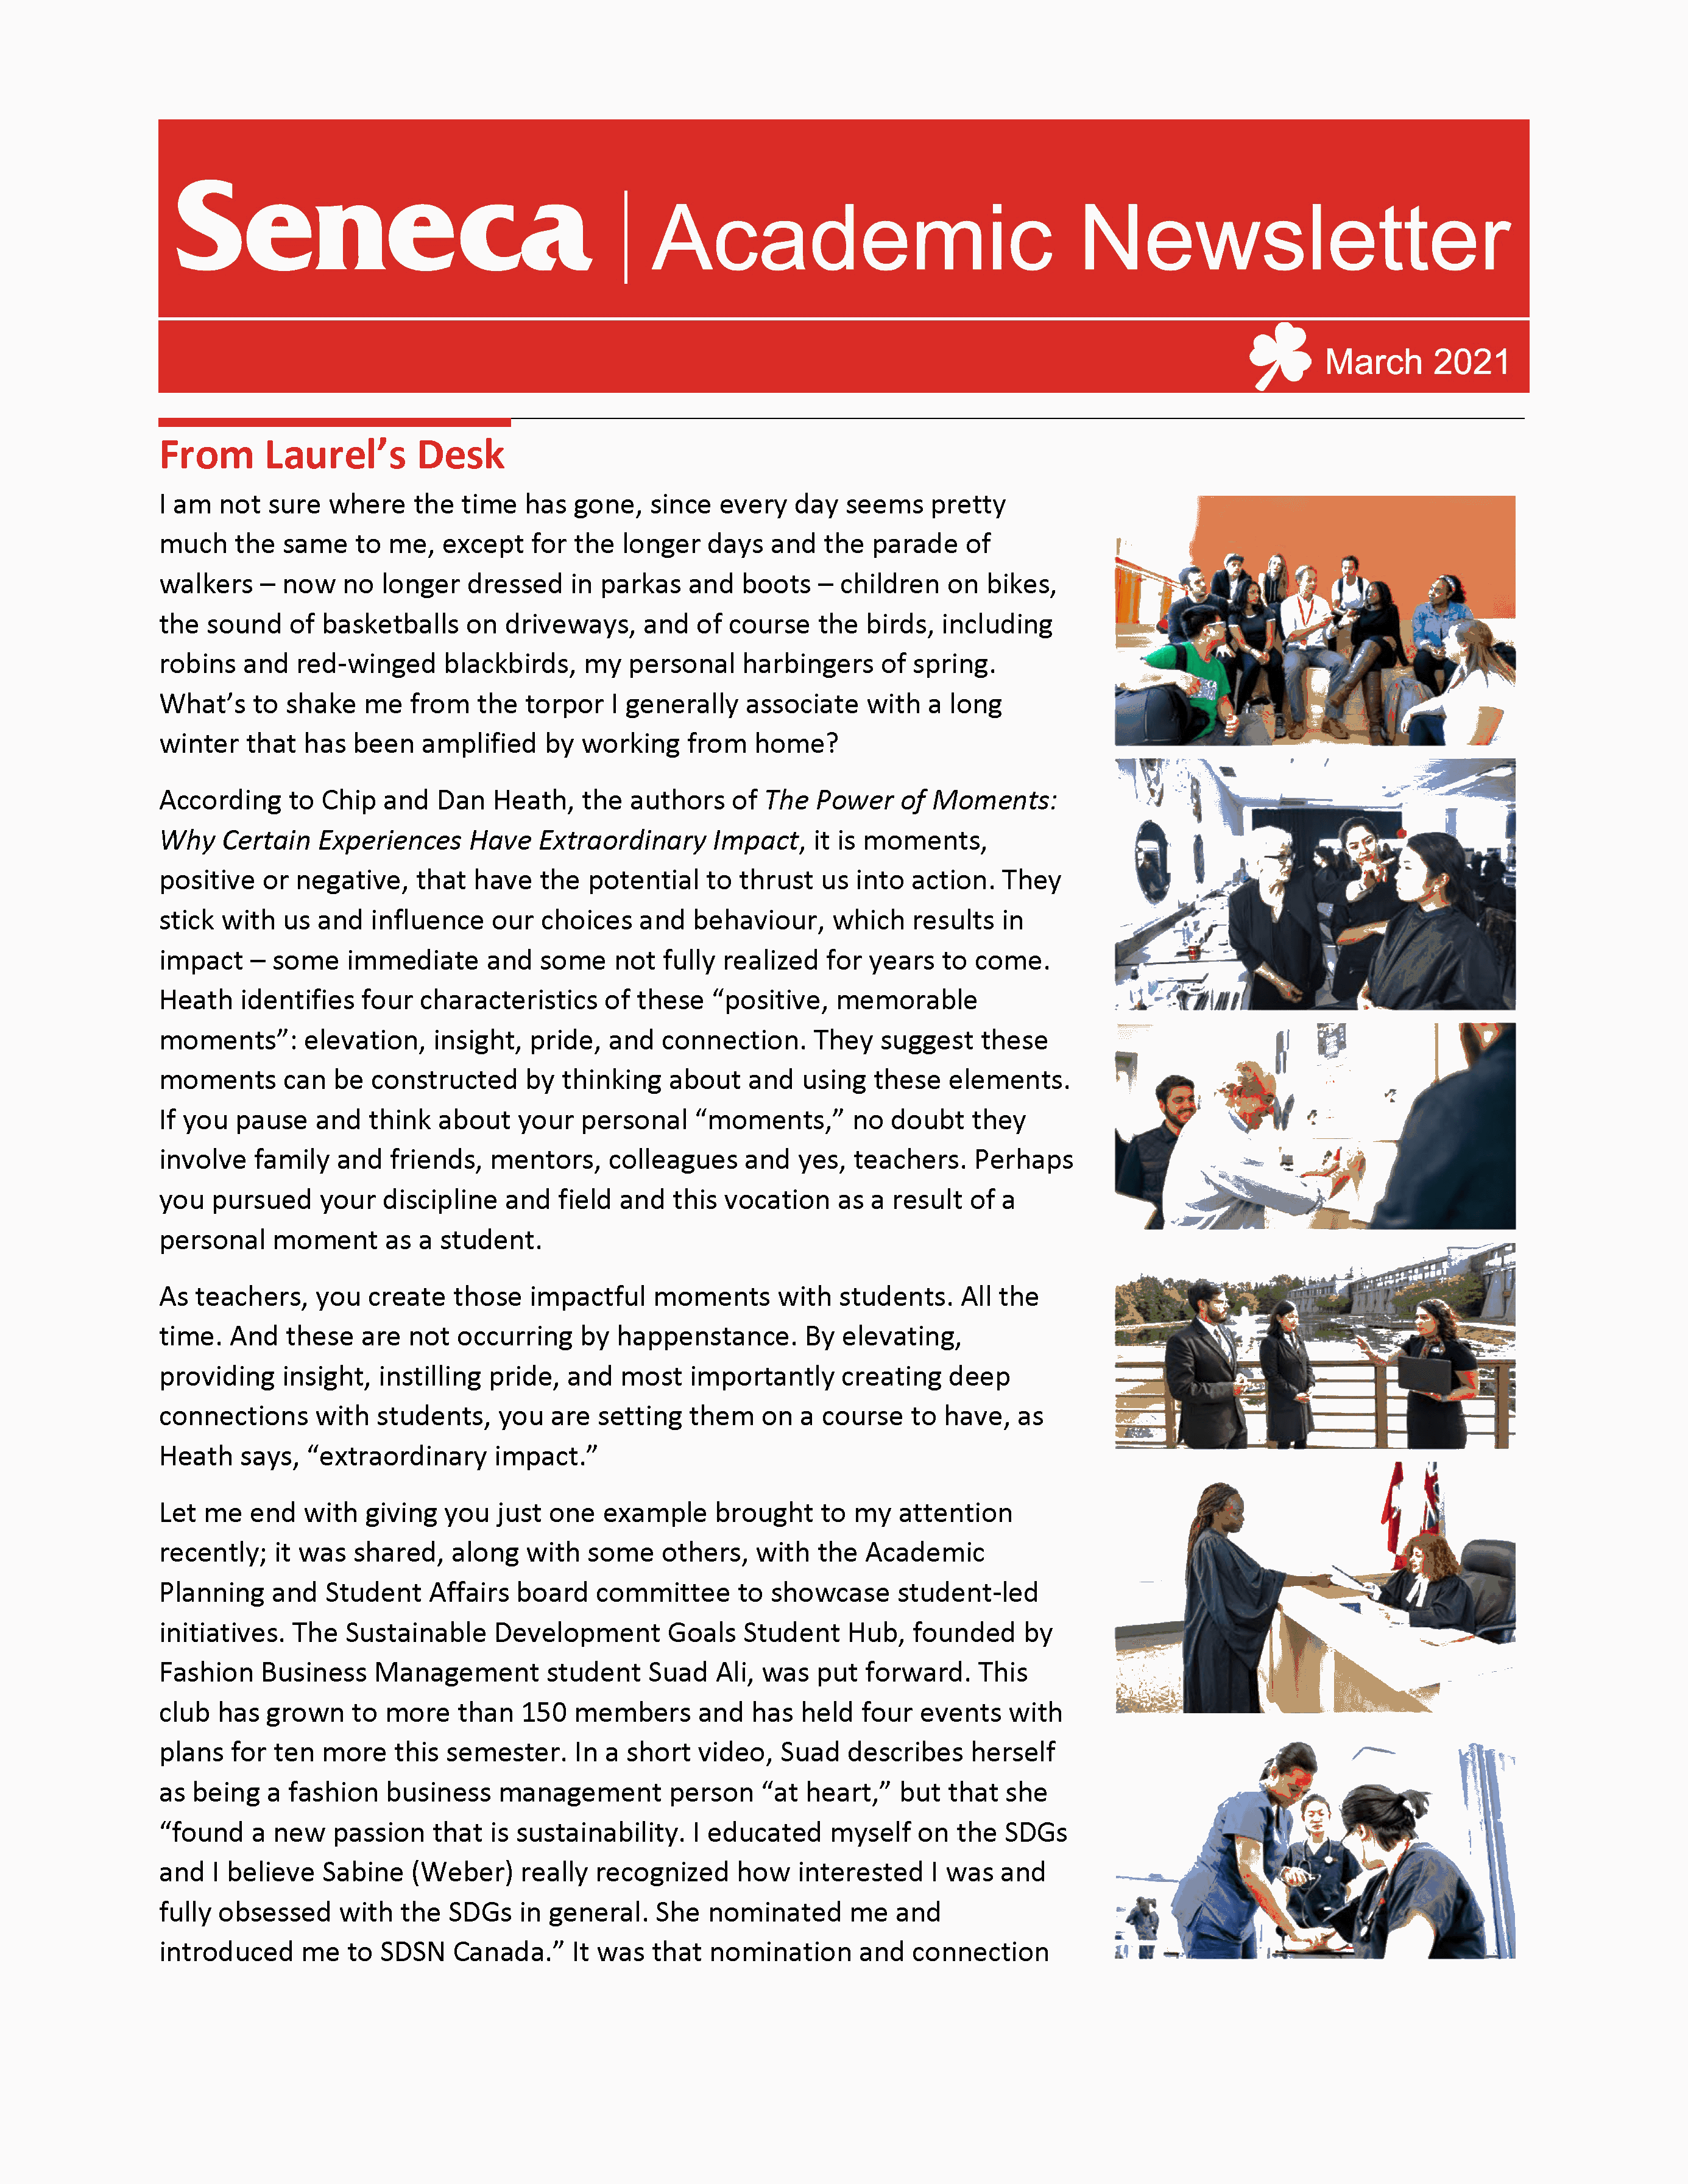 The March 2021 issue of the Academic Newsletter